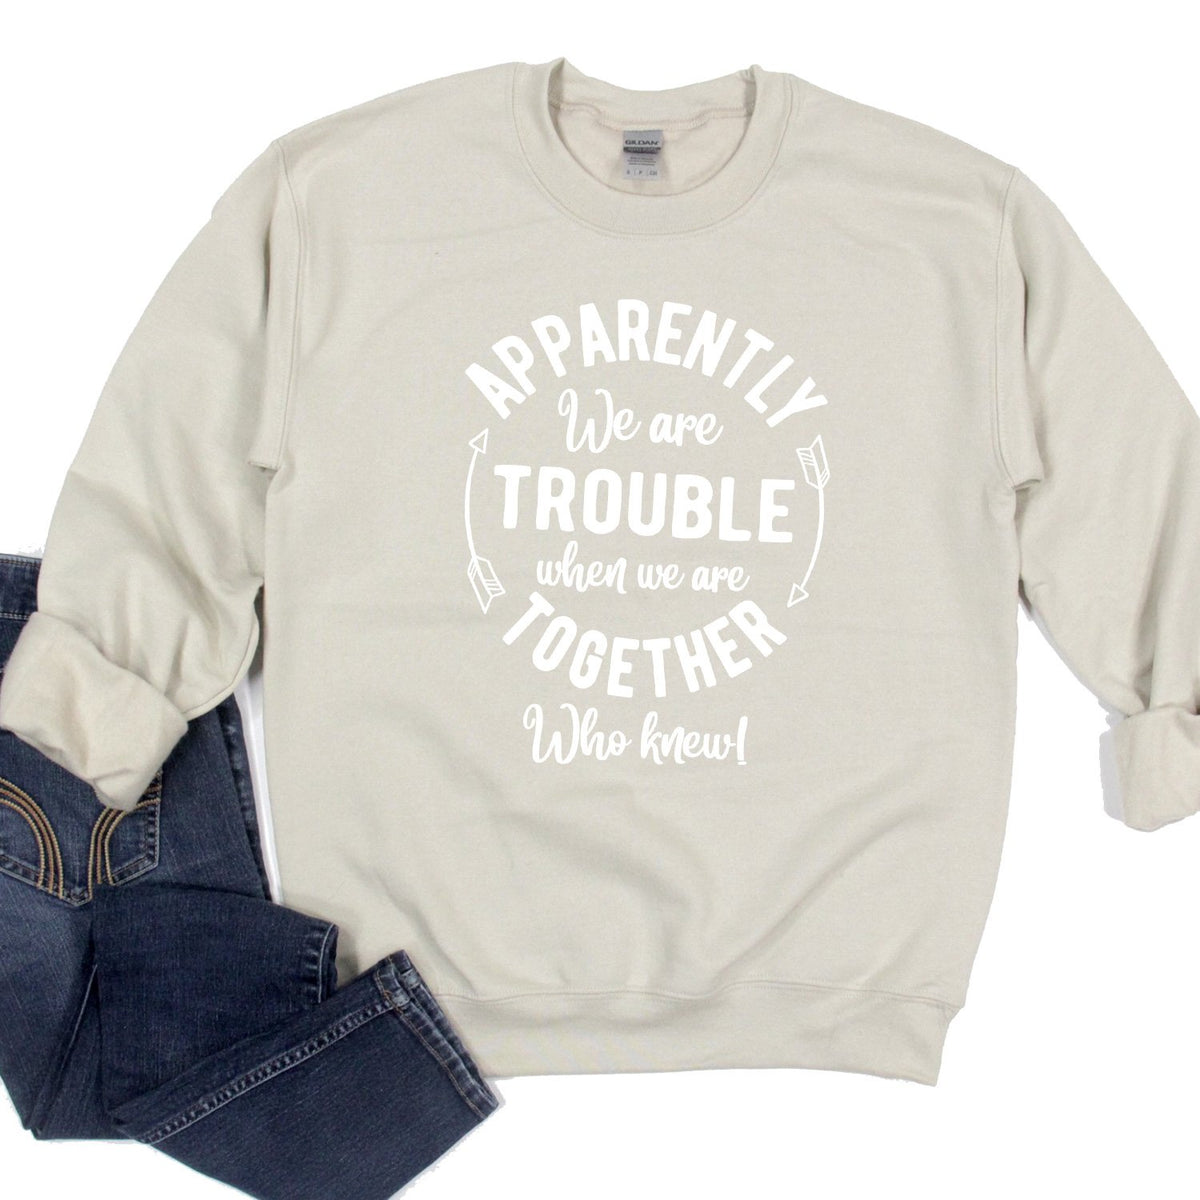 Apparently We Are Trouble When We Are Together - Long Sleeve Heavy Crewneck Sweatshirt